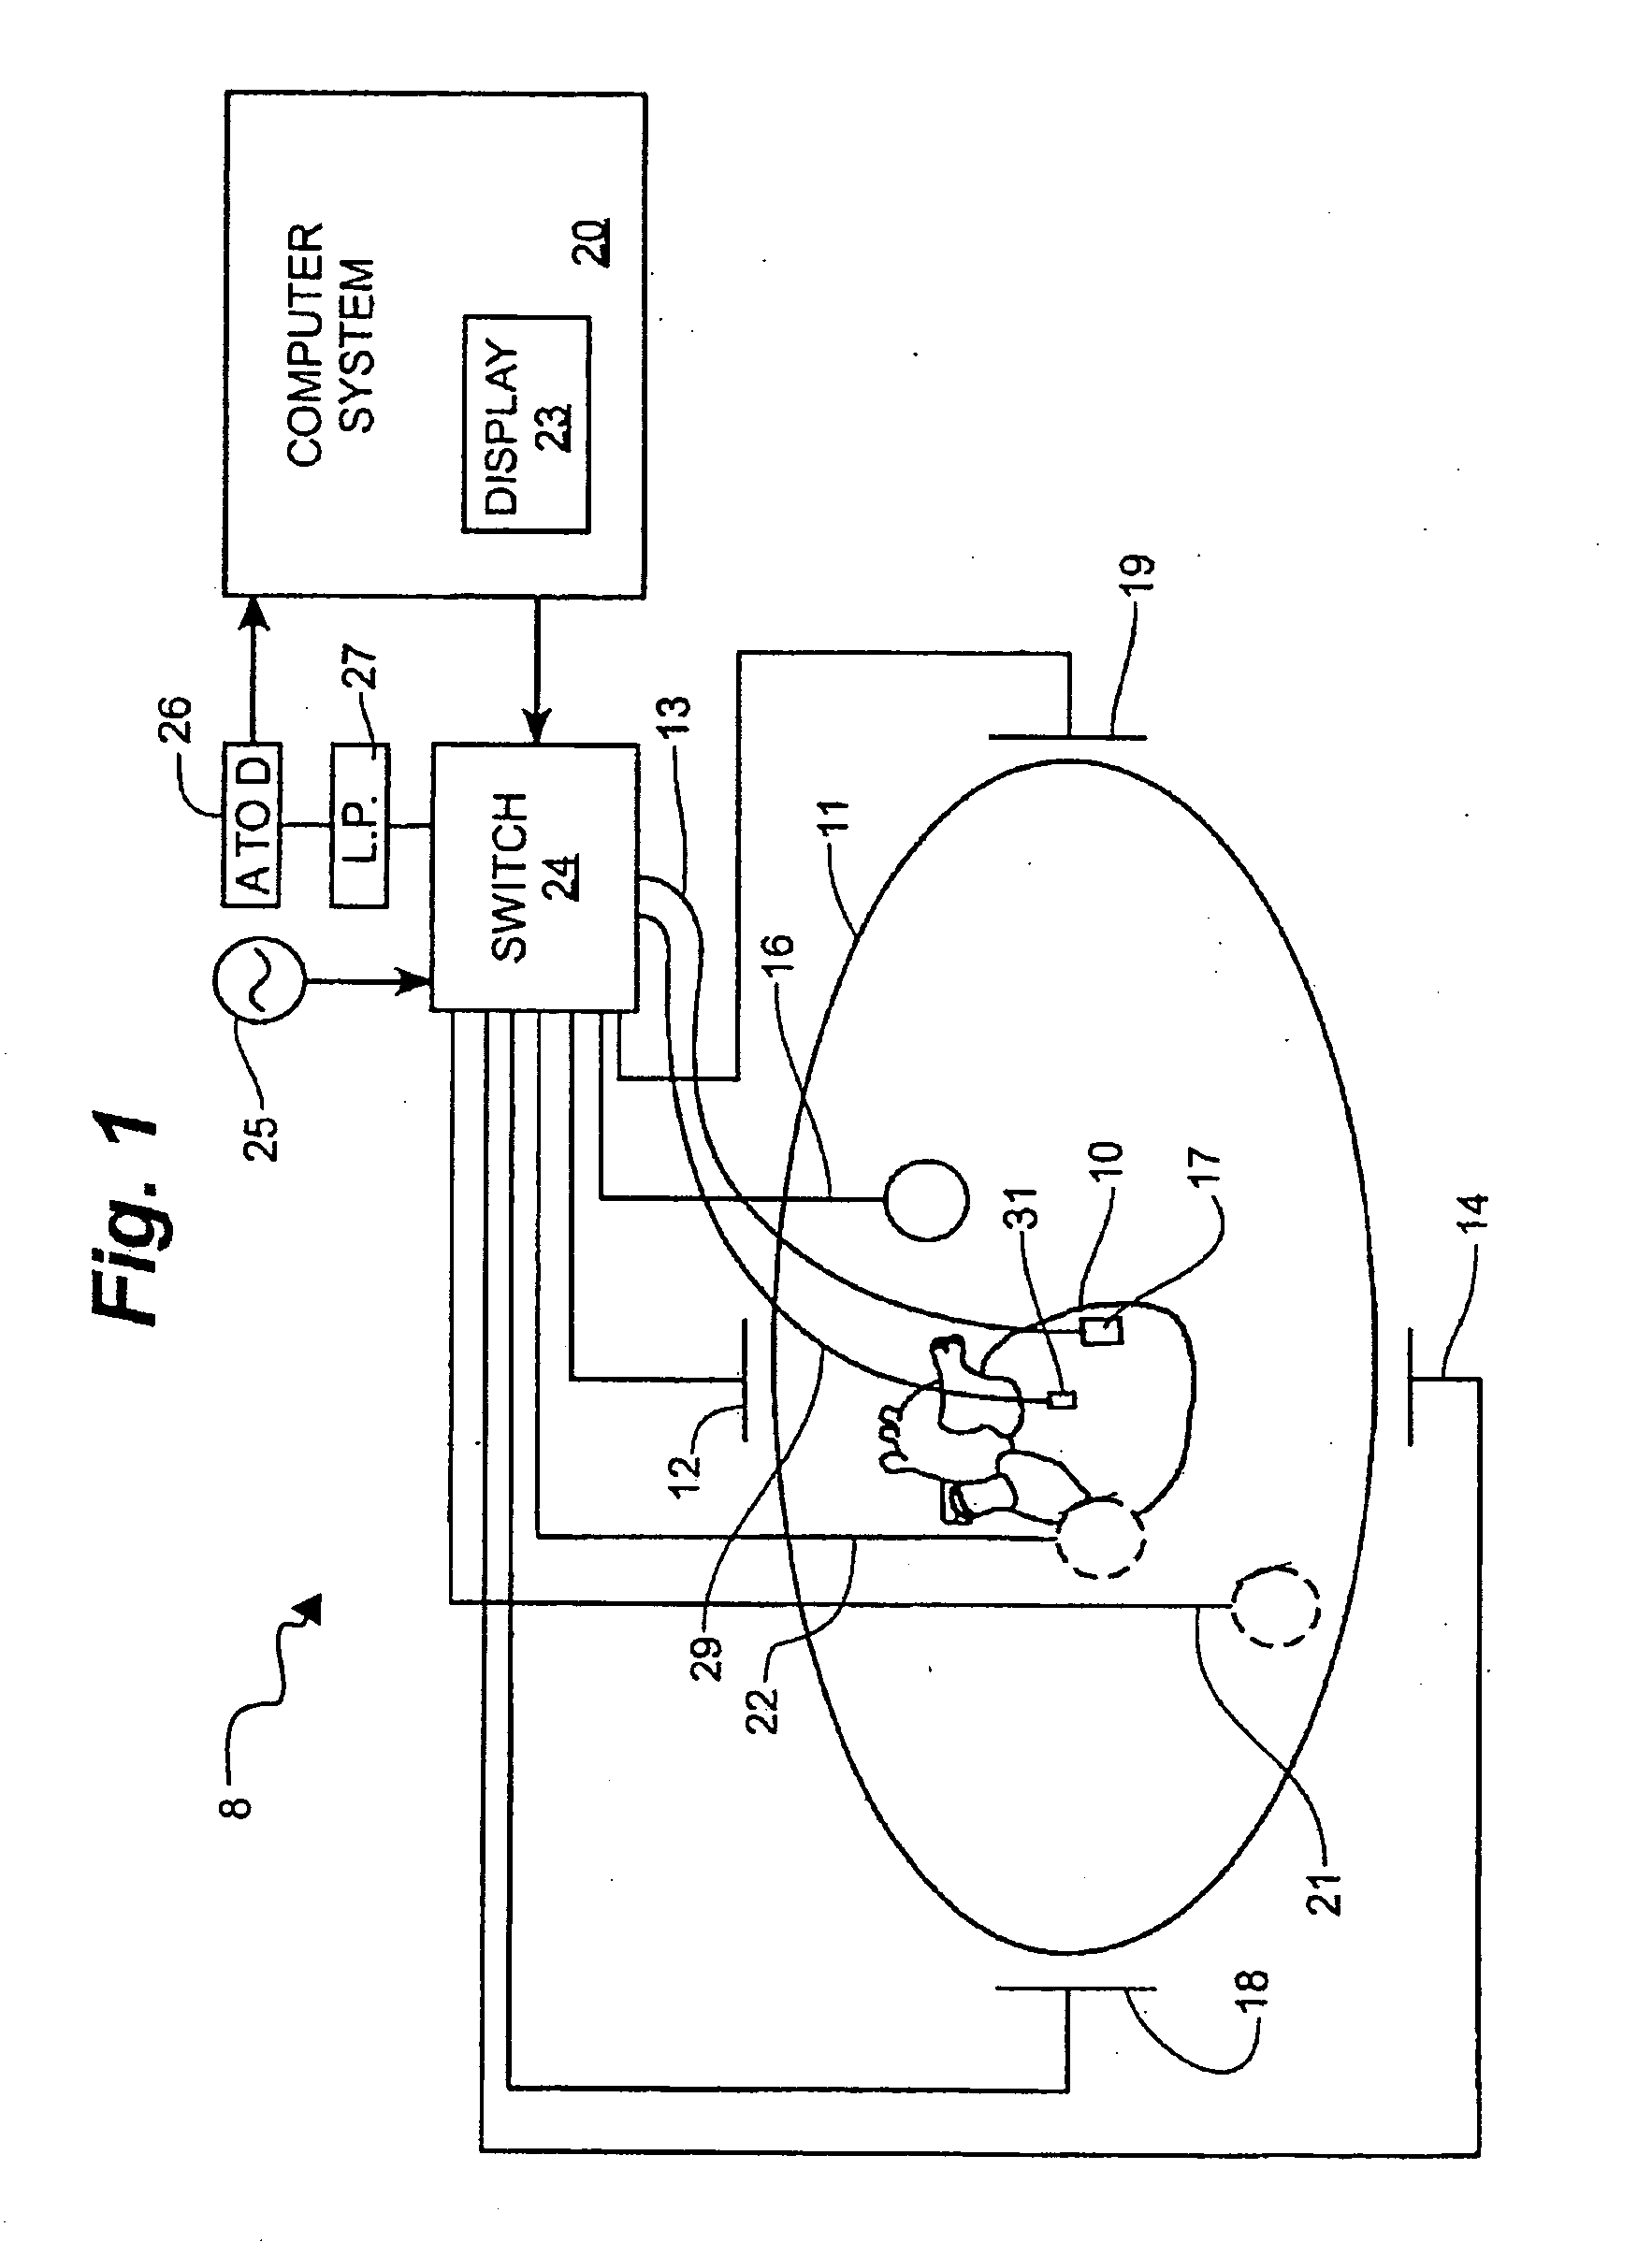 System and method for mapping complex fractionated electrogram information